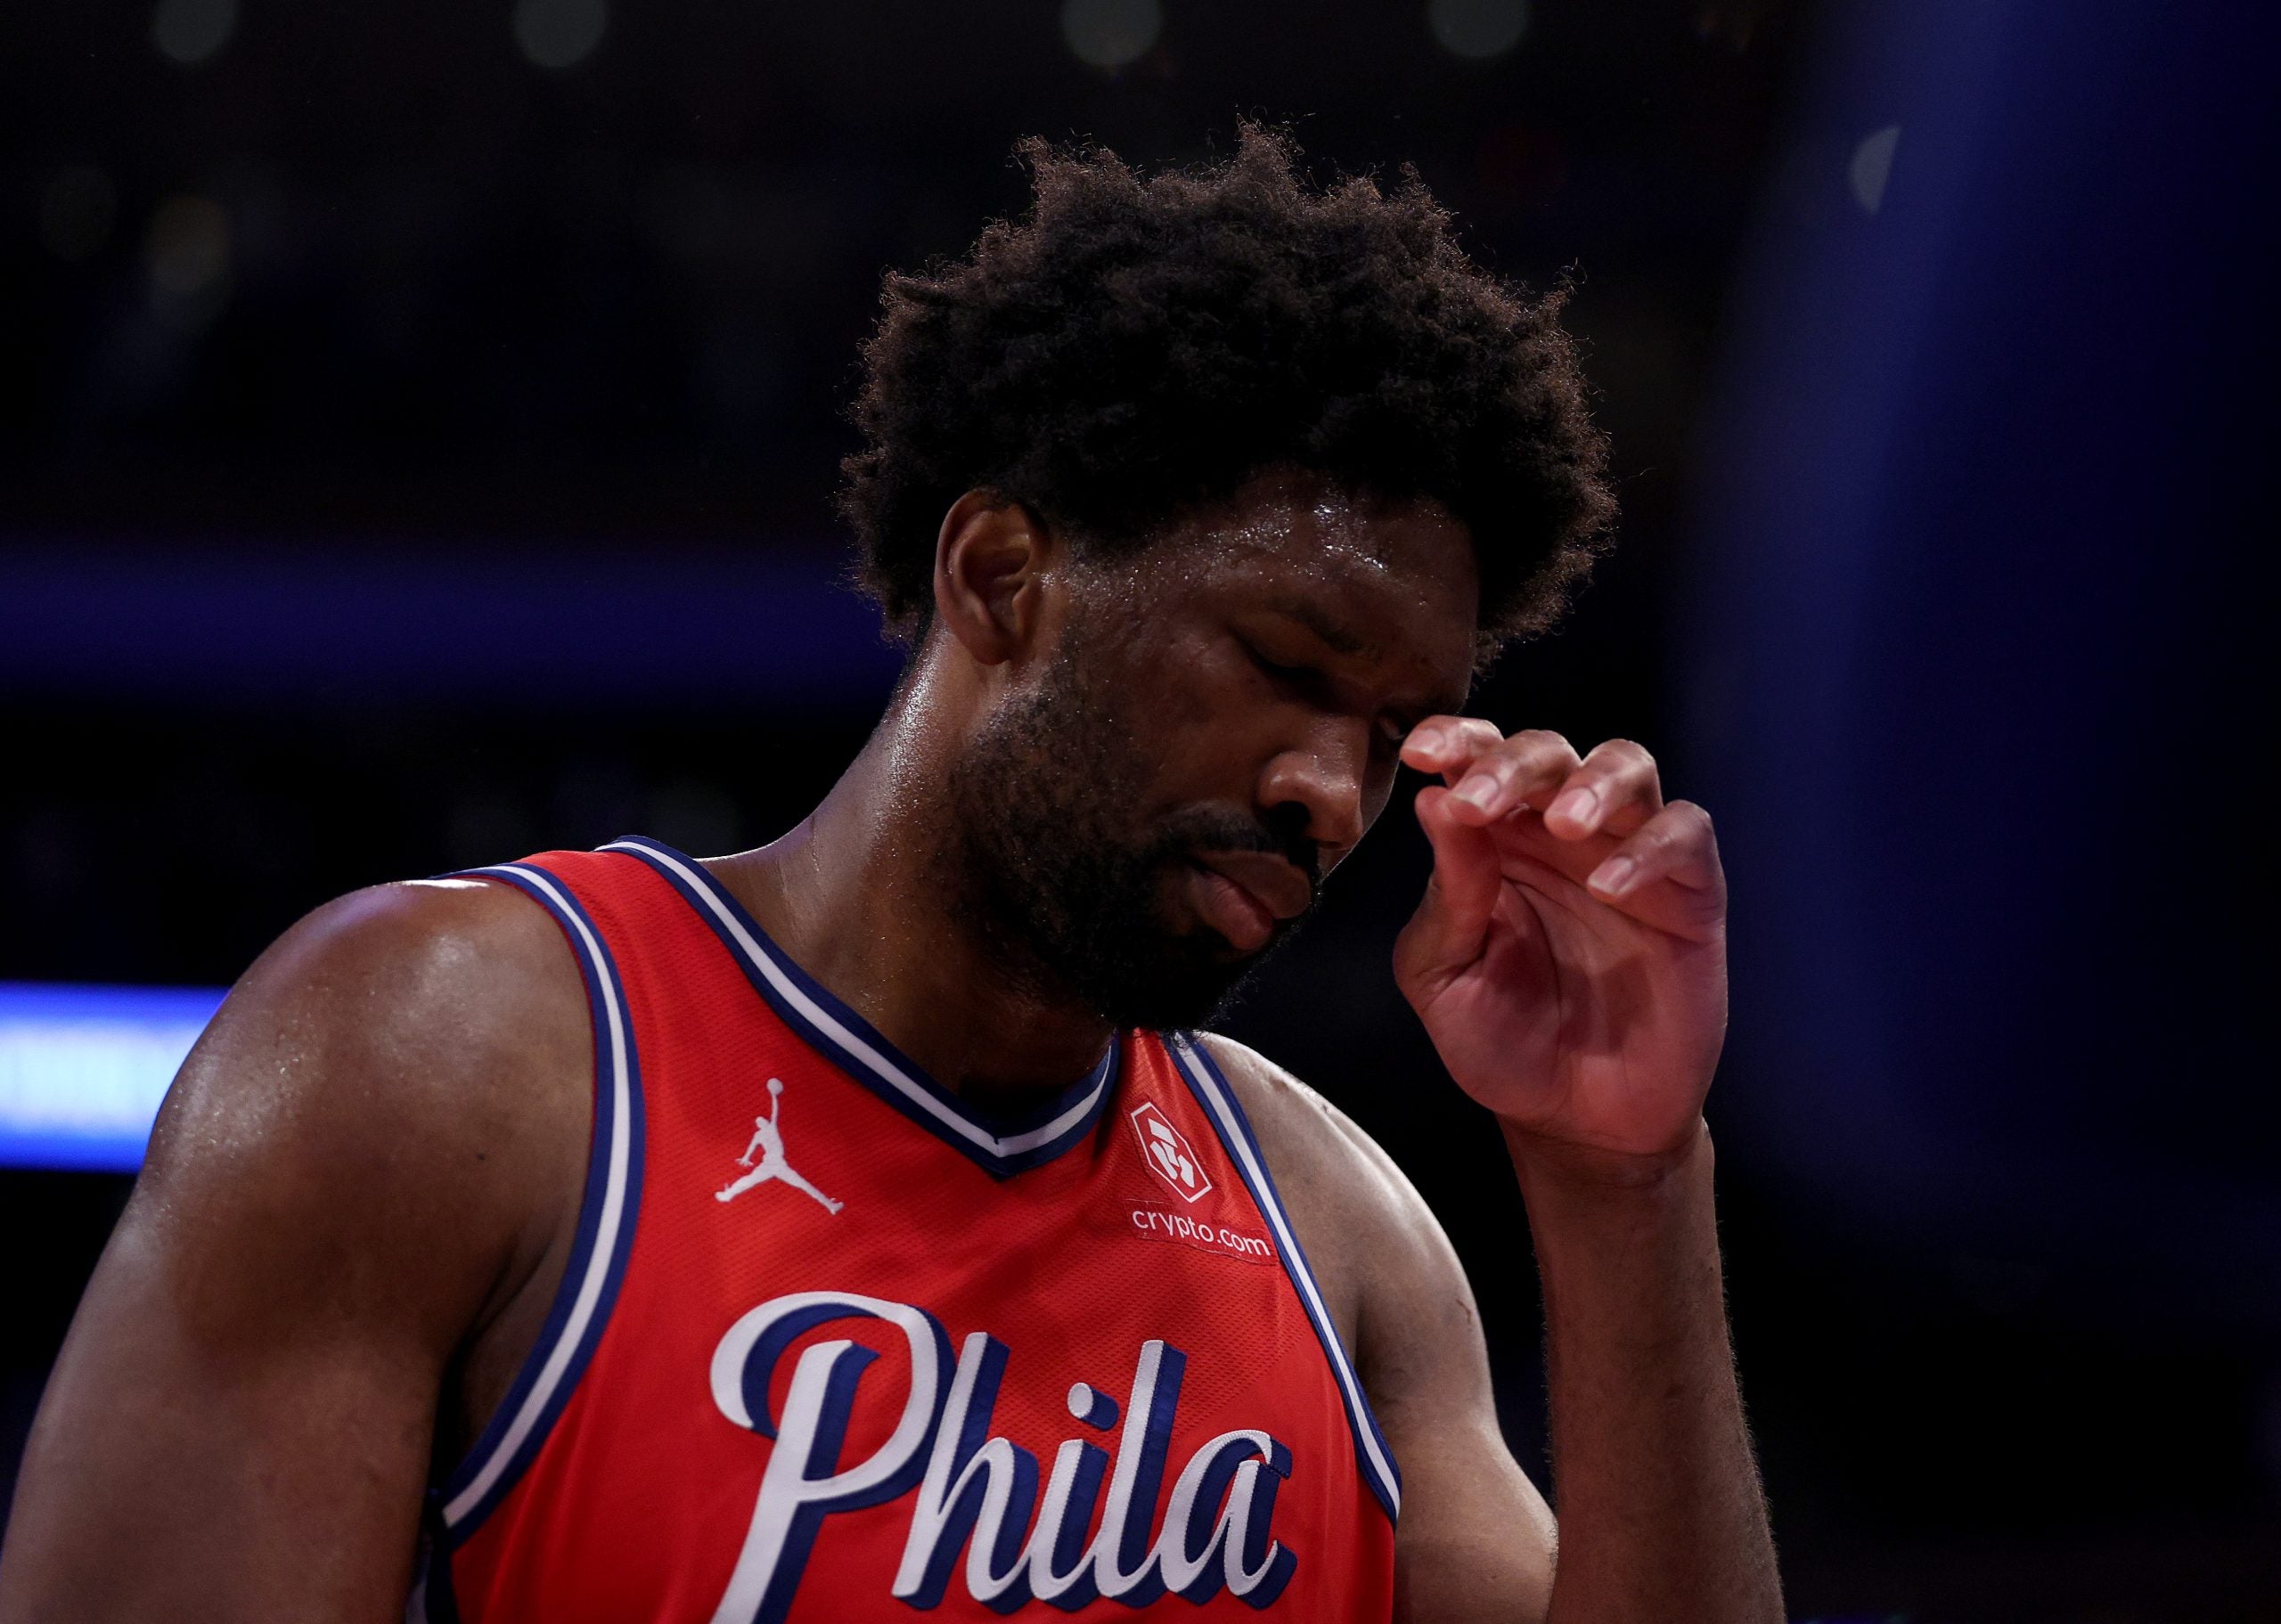 Health Matters: NBA Star Joel Embiid Reveals He Has Bell's Palsy After Fans Notice He Can't Close His Eye